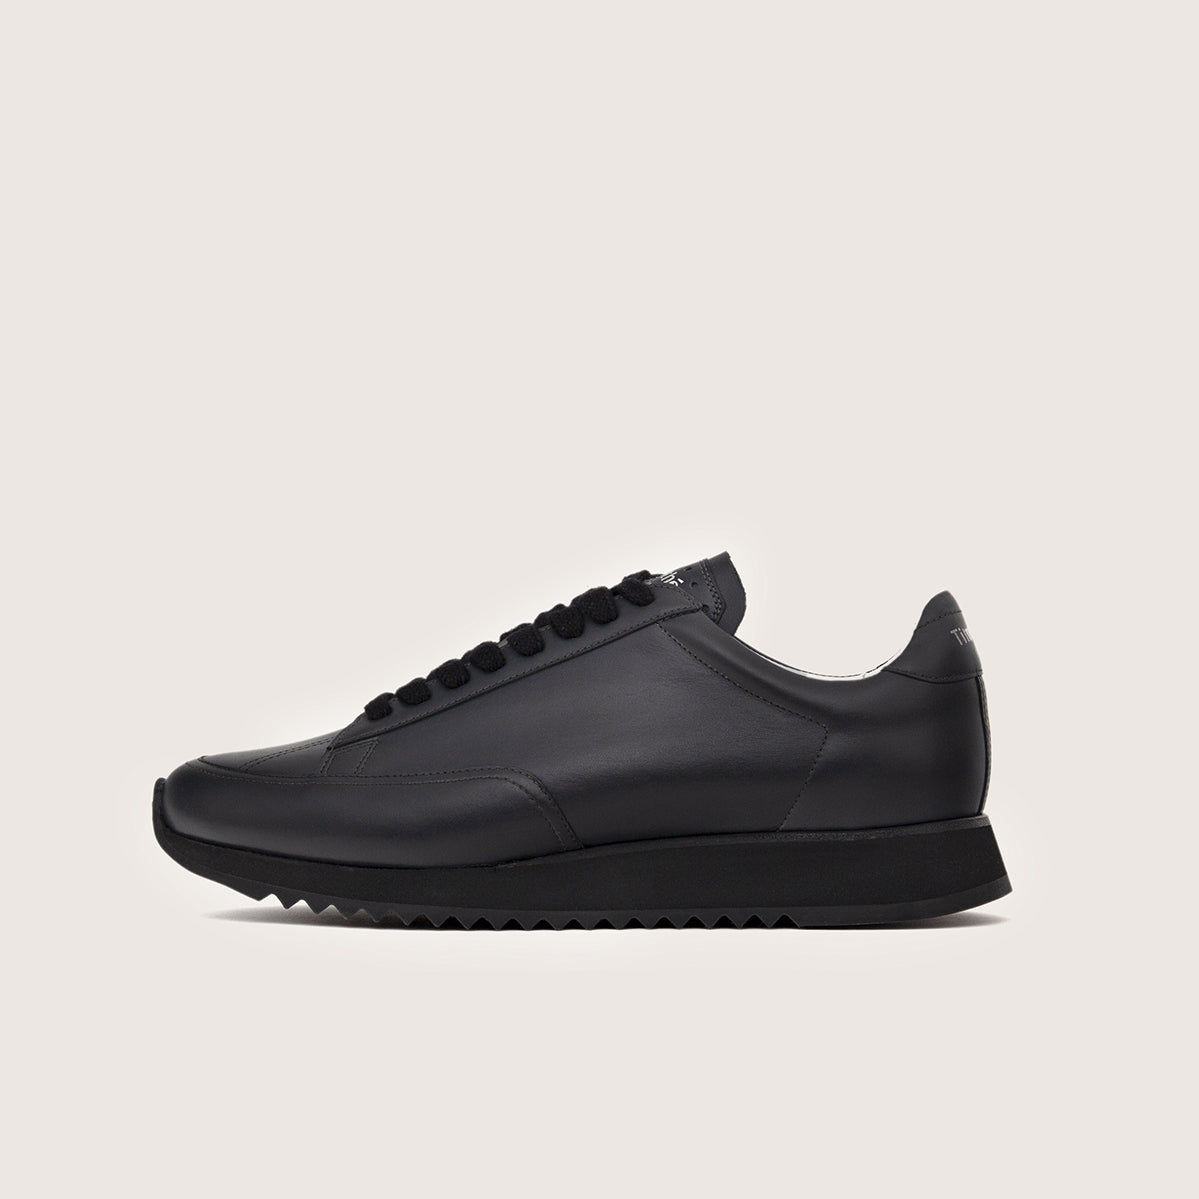 sneaker-cabourg-nappa-all-black-timothee-paris-side-view-lifestyle-brand-big-size-picture